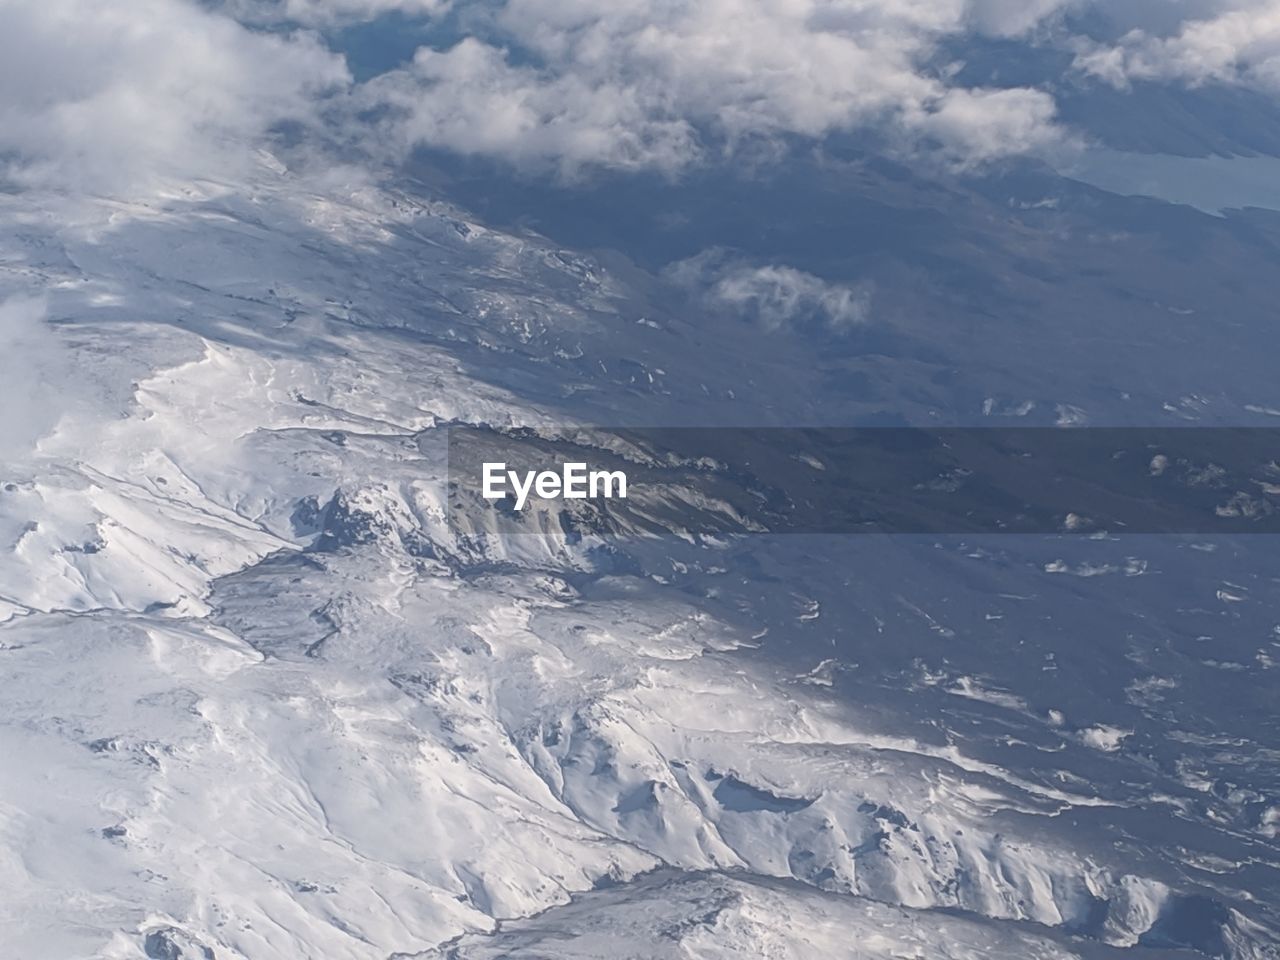 AERIAL VIEW OF SNOWCAPPED MOUNTAIN AGAINST CLOUDY SKY